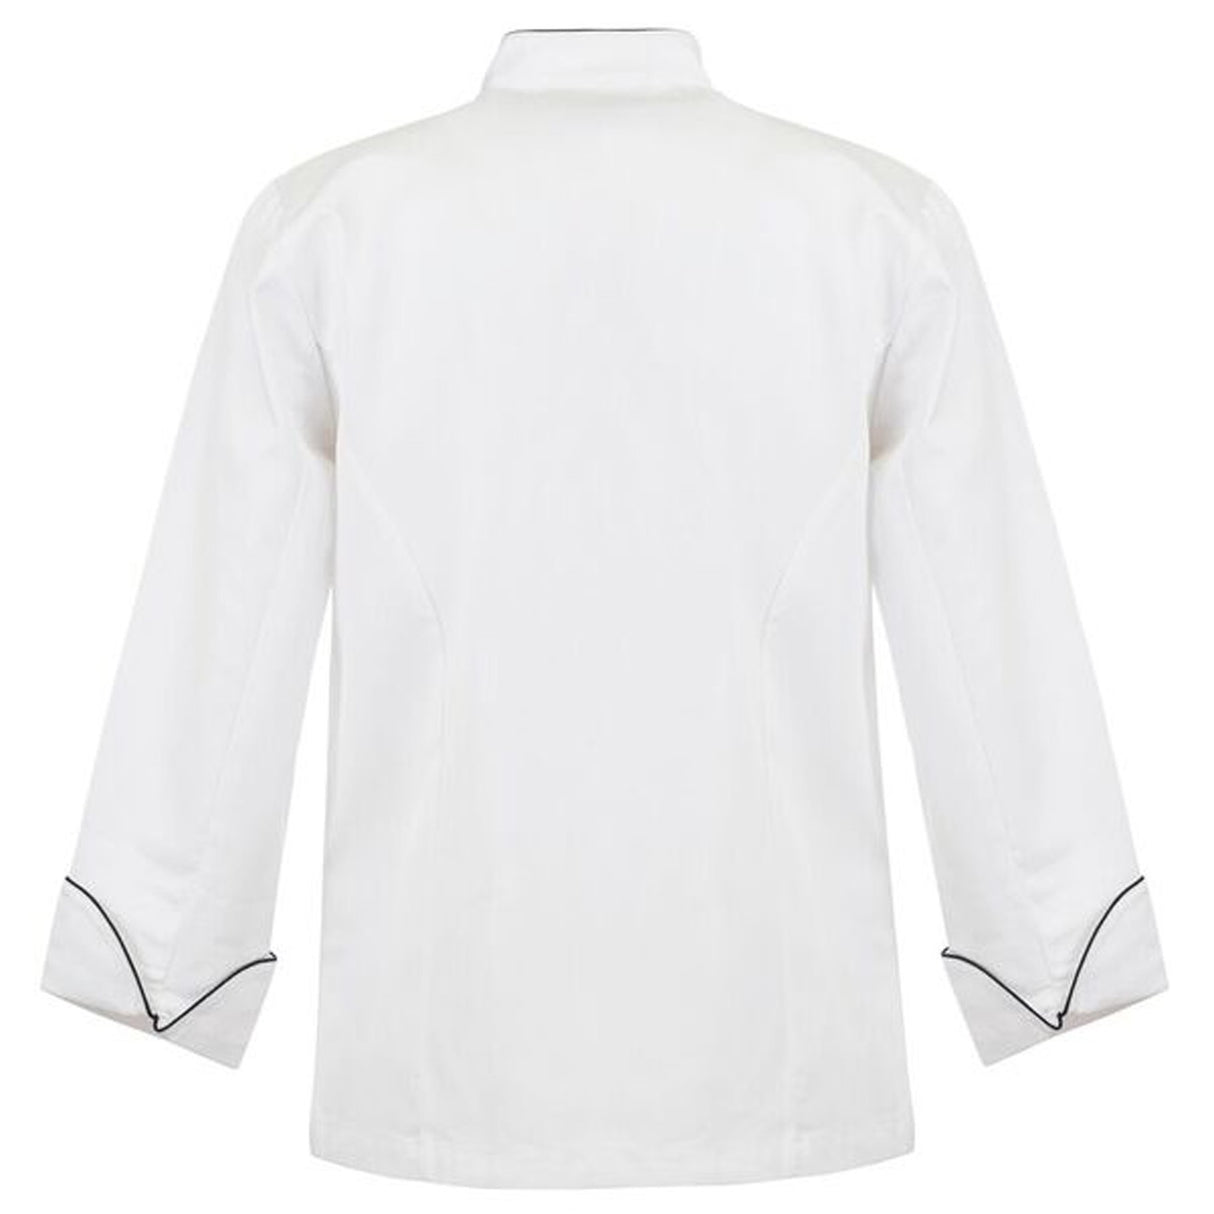 CJ037 Chefs Craft Executive Long Sleeve Chef Jacket With Piping